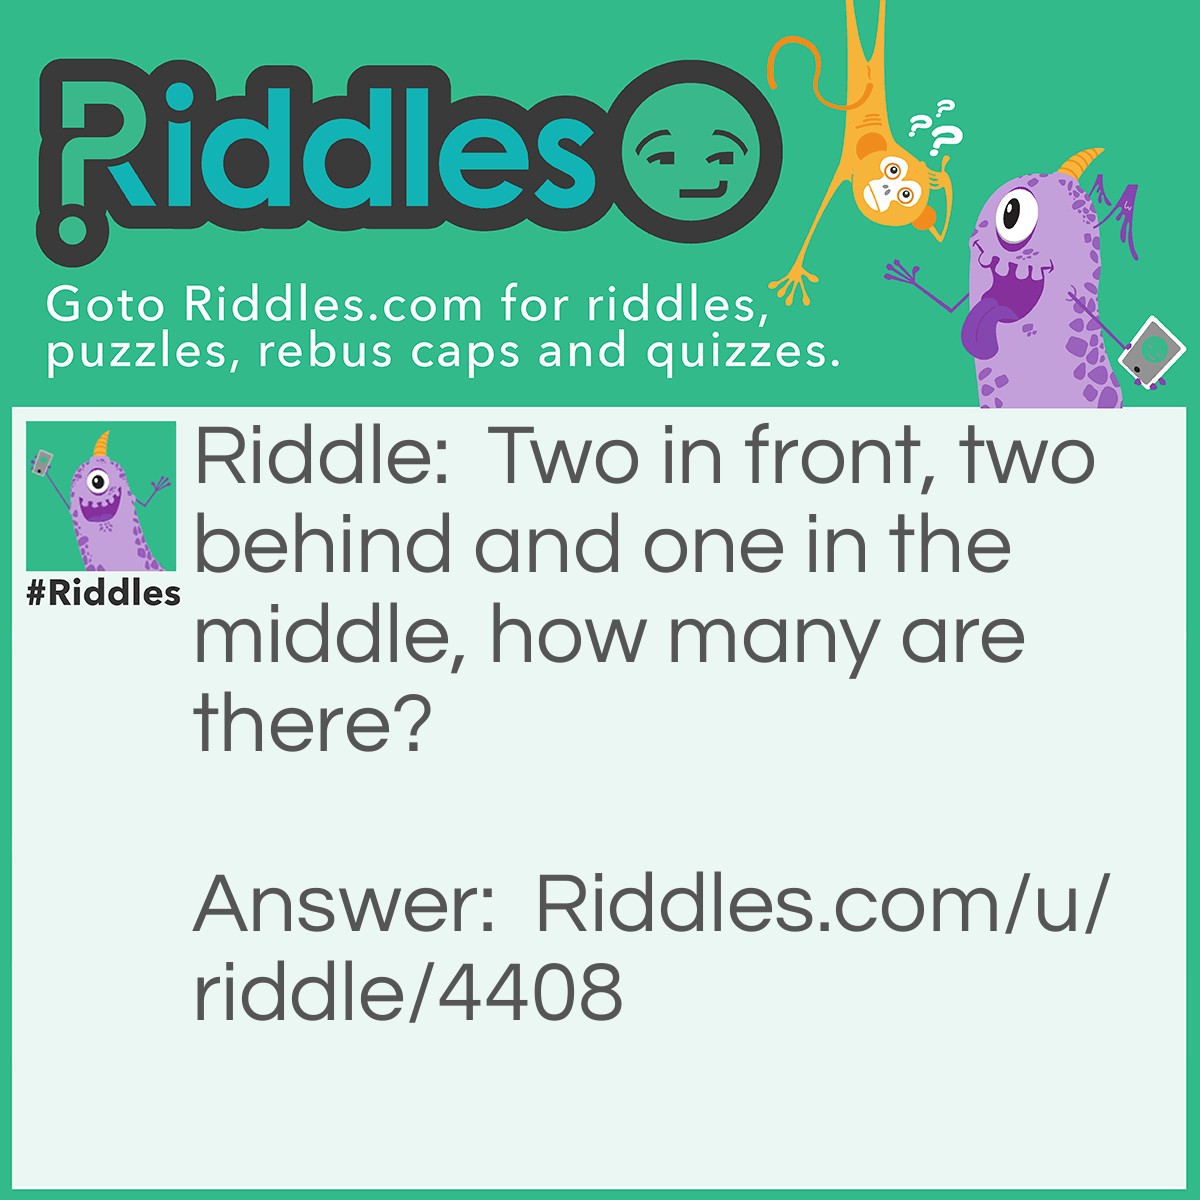 Riddle: Two in front, two behind and one in the middle, how many are there? Answer: Three (12)3 1(23) 1(2)3.